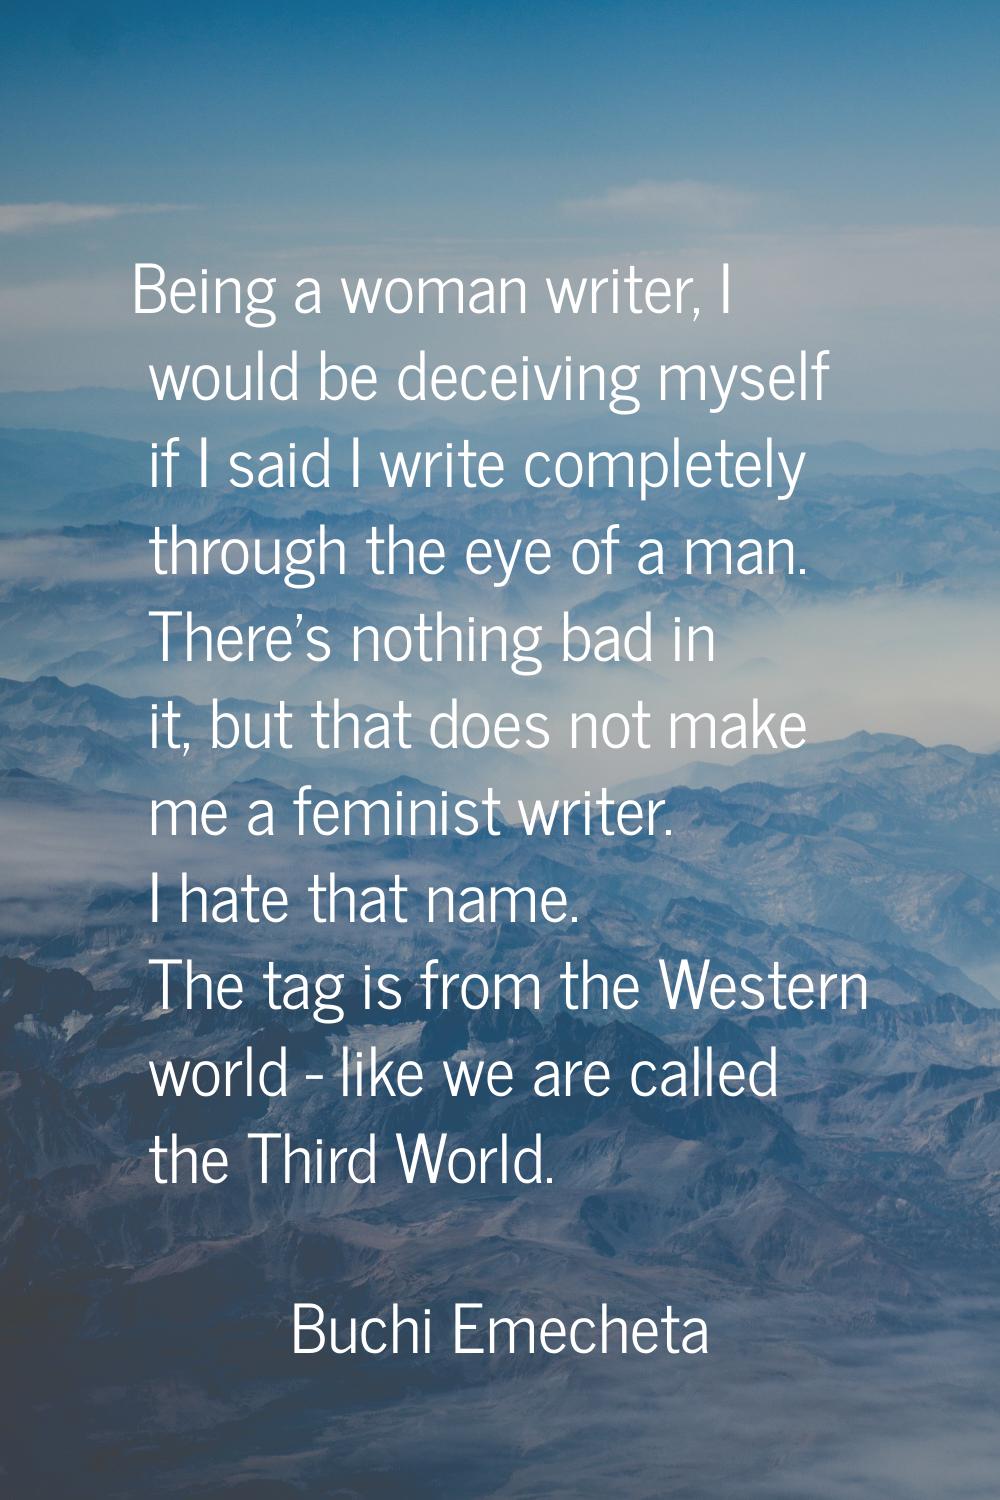 Being a woman writer, I would be deceiving myself if I said I write completely through the eye of a